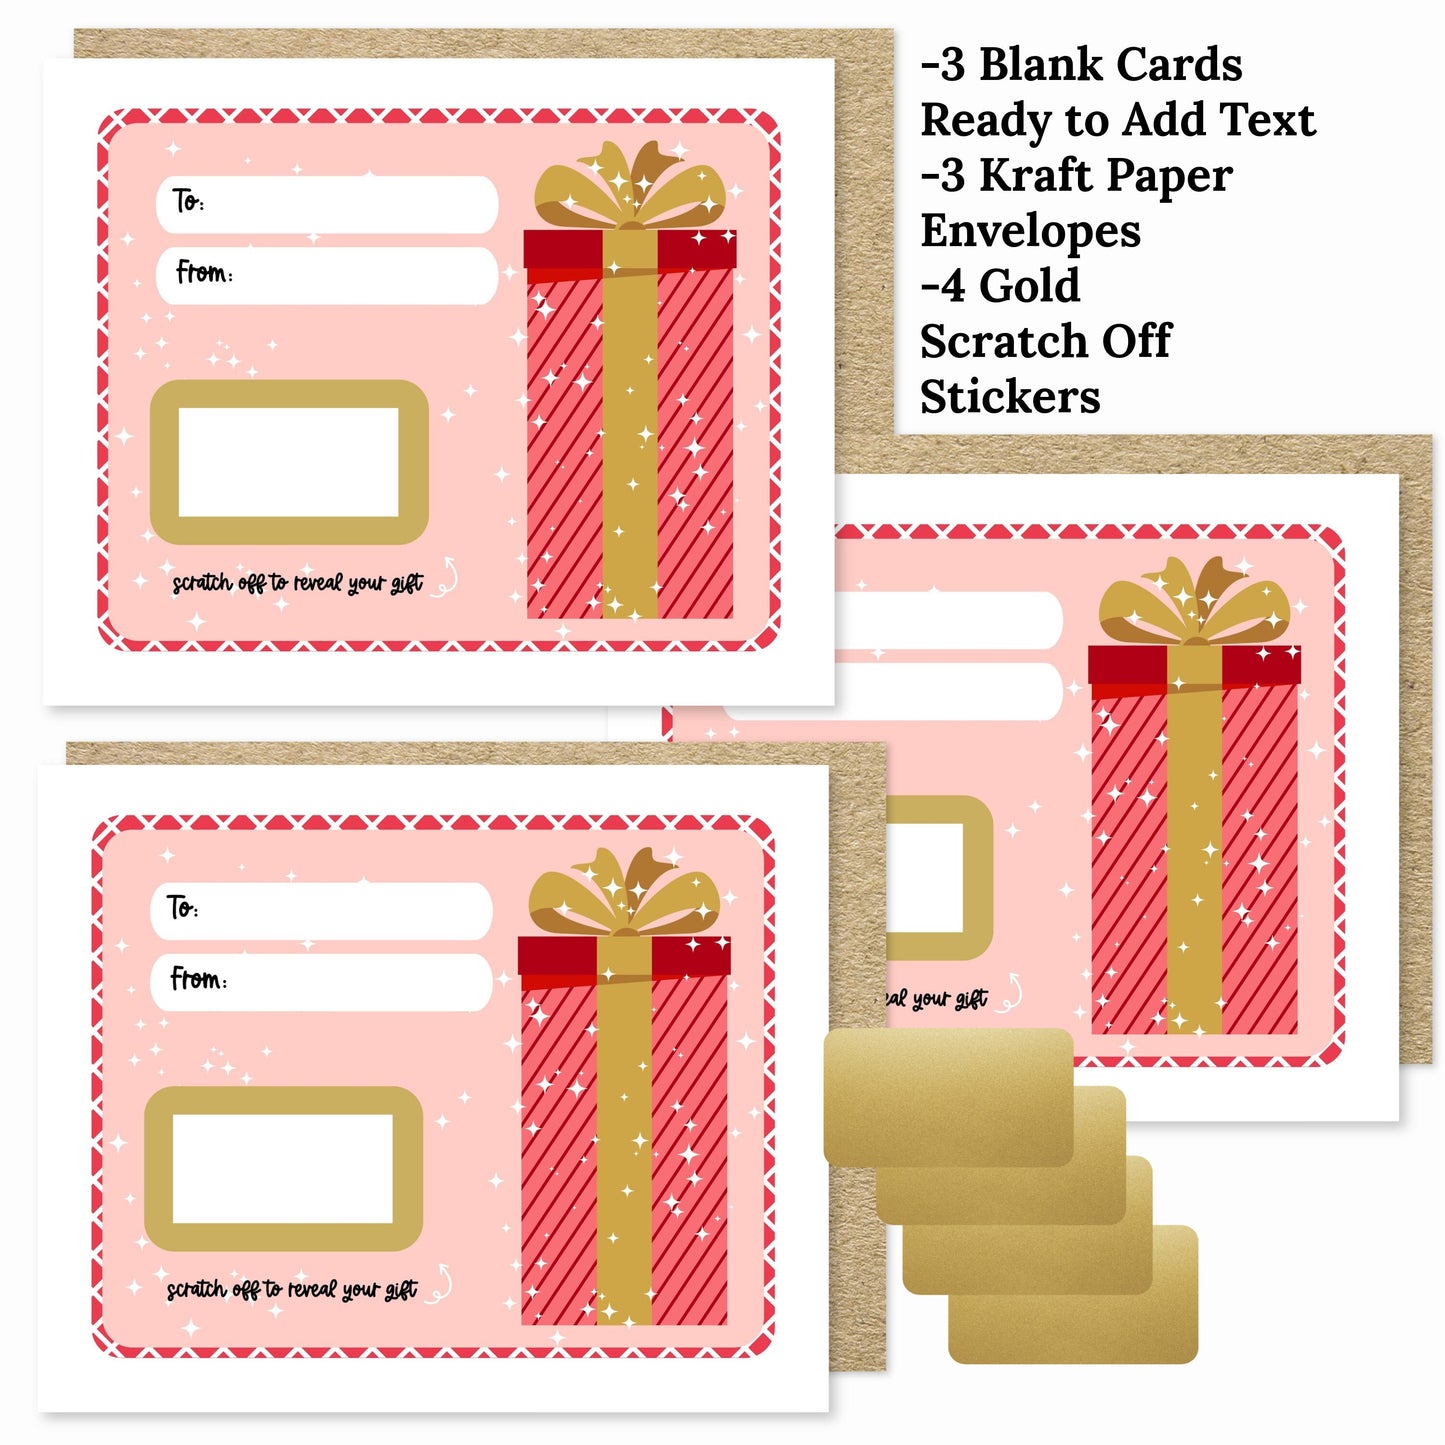 3 PK DIY Text Scratch Off Christmas Holiday Gift Card | Personalized Gift Tag Surprise Budget from Kids